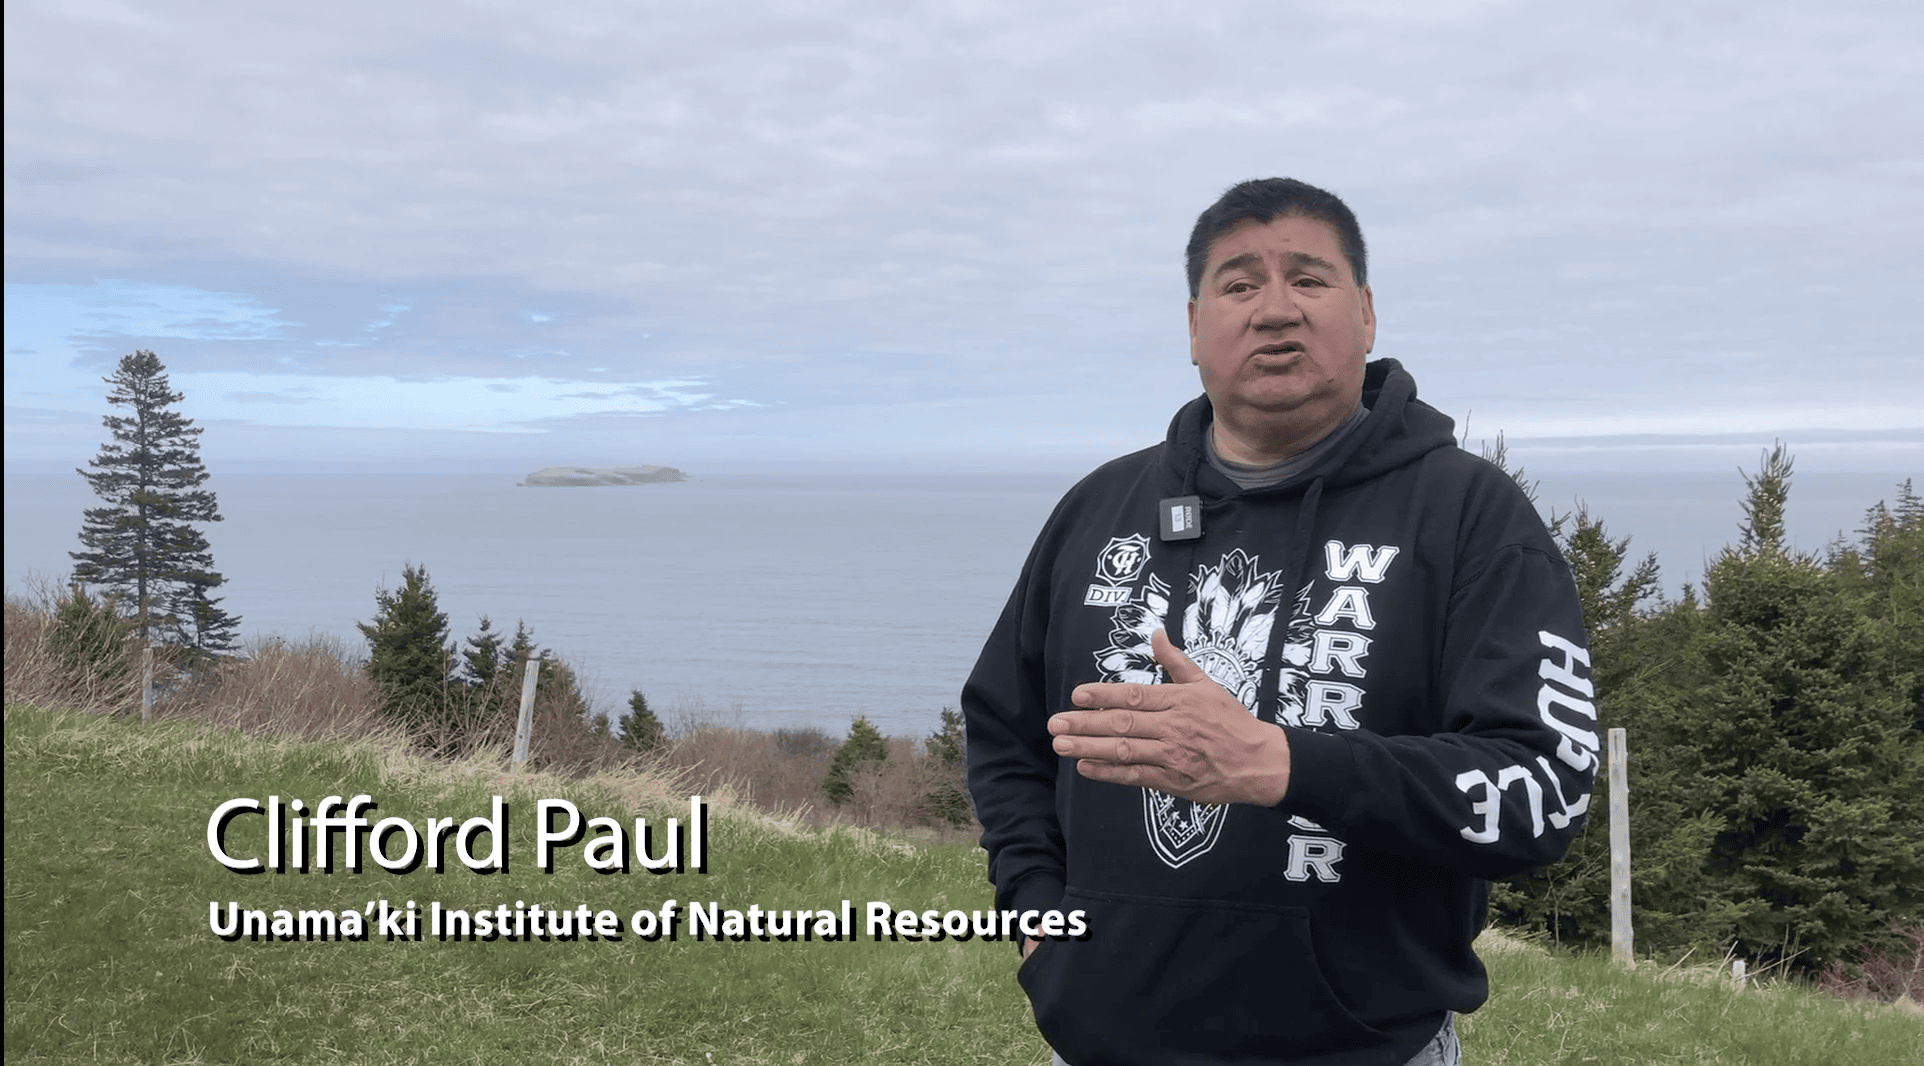 Clifford Paul works for the Unama'ki Institute of Natural Resources